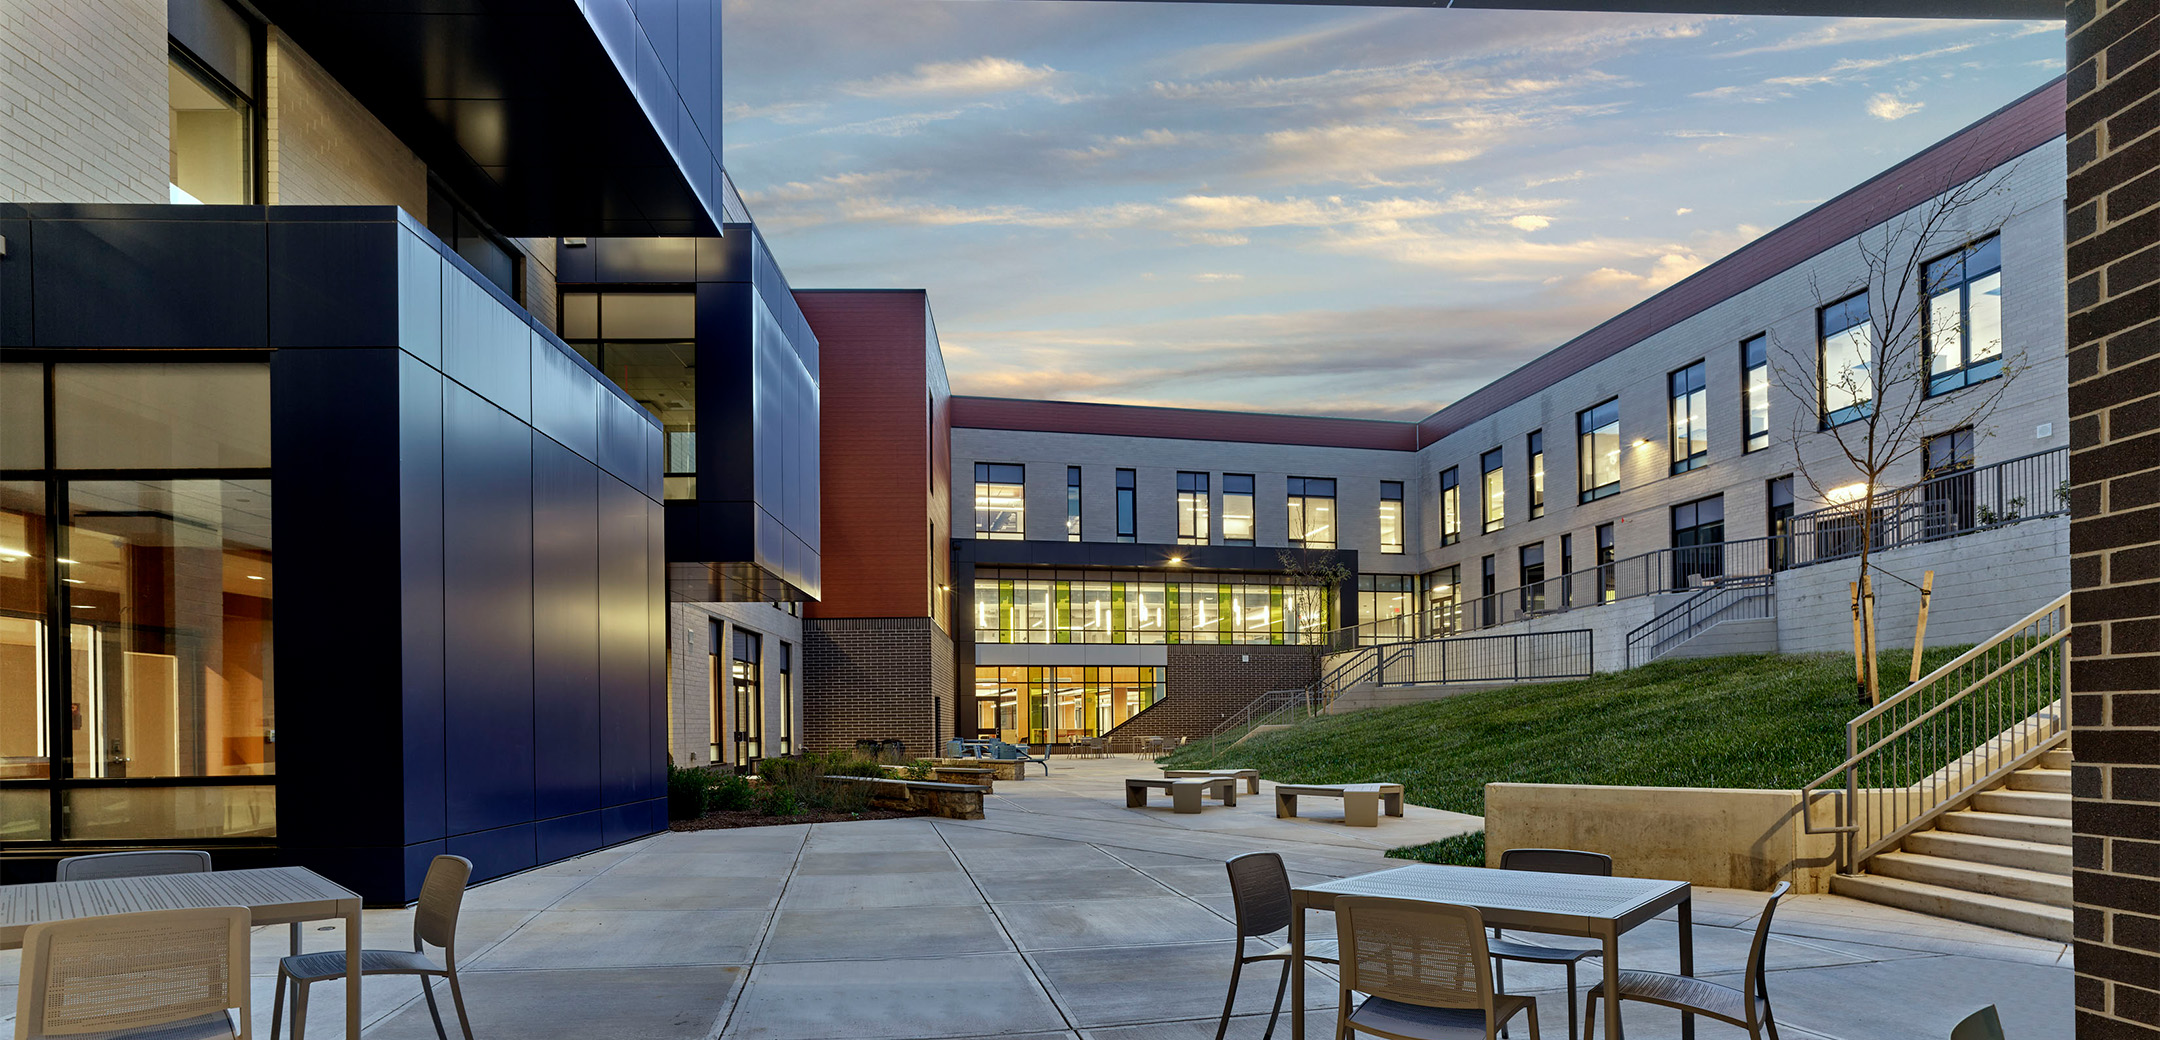 The exterior backside of Black Rock Middle School featuring a terrace enclosed within the building walls.